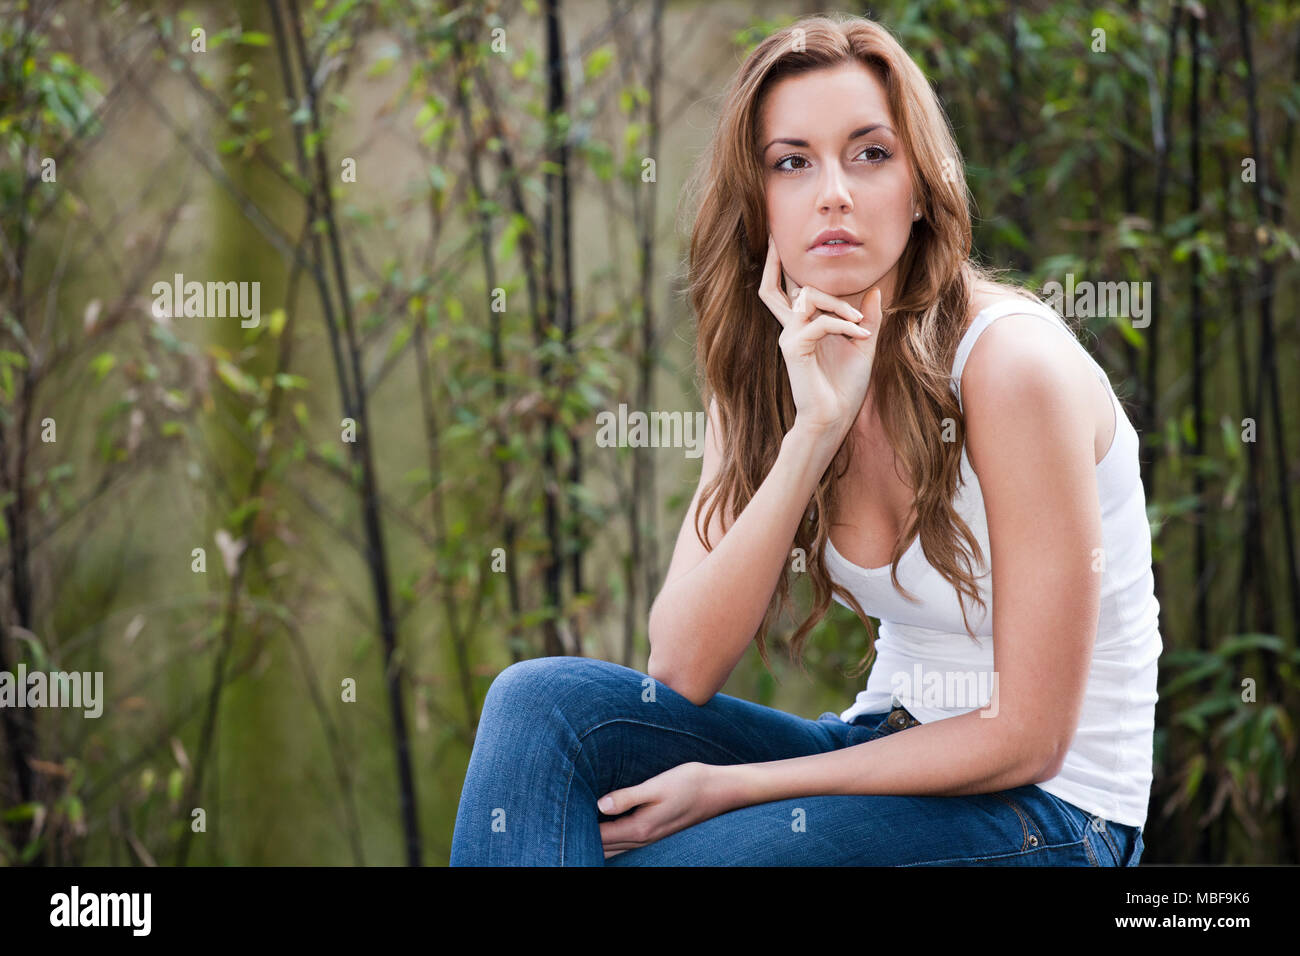 Young woman thinking and gazing into the distance sitting outside Stock Photo